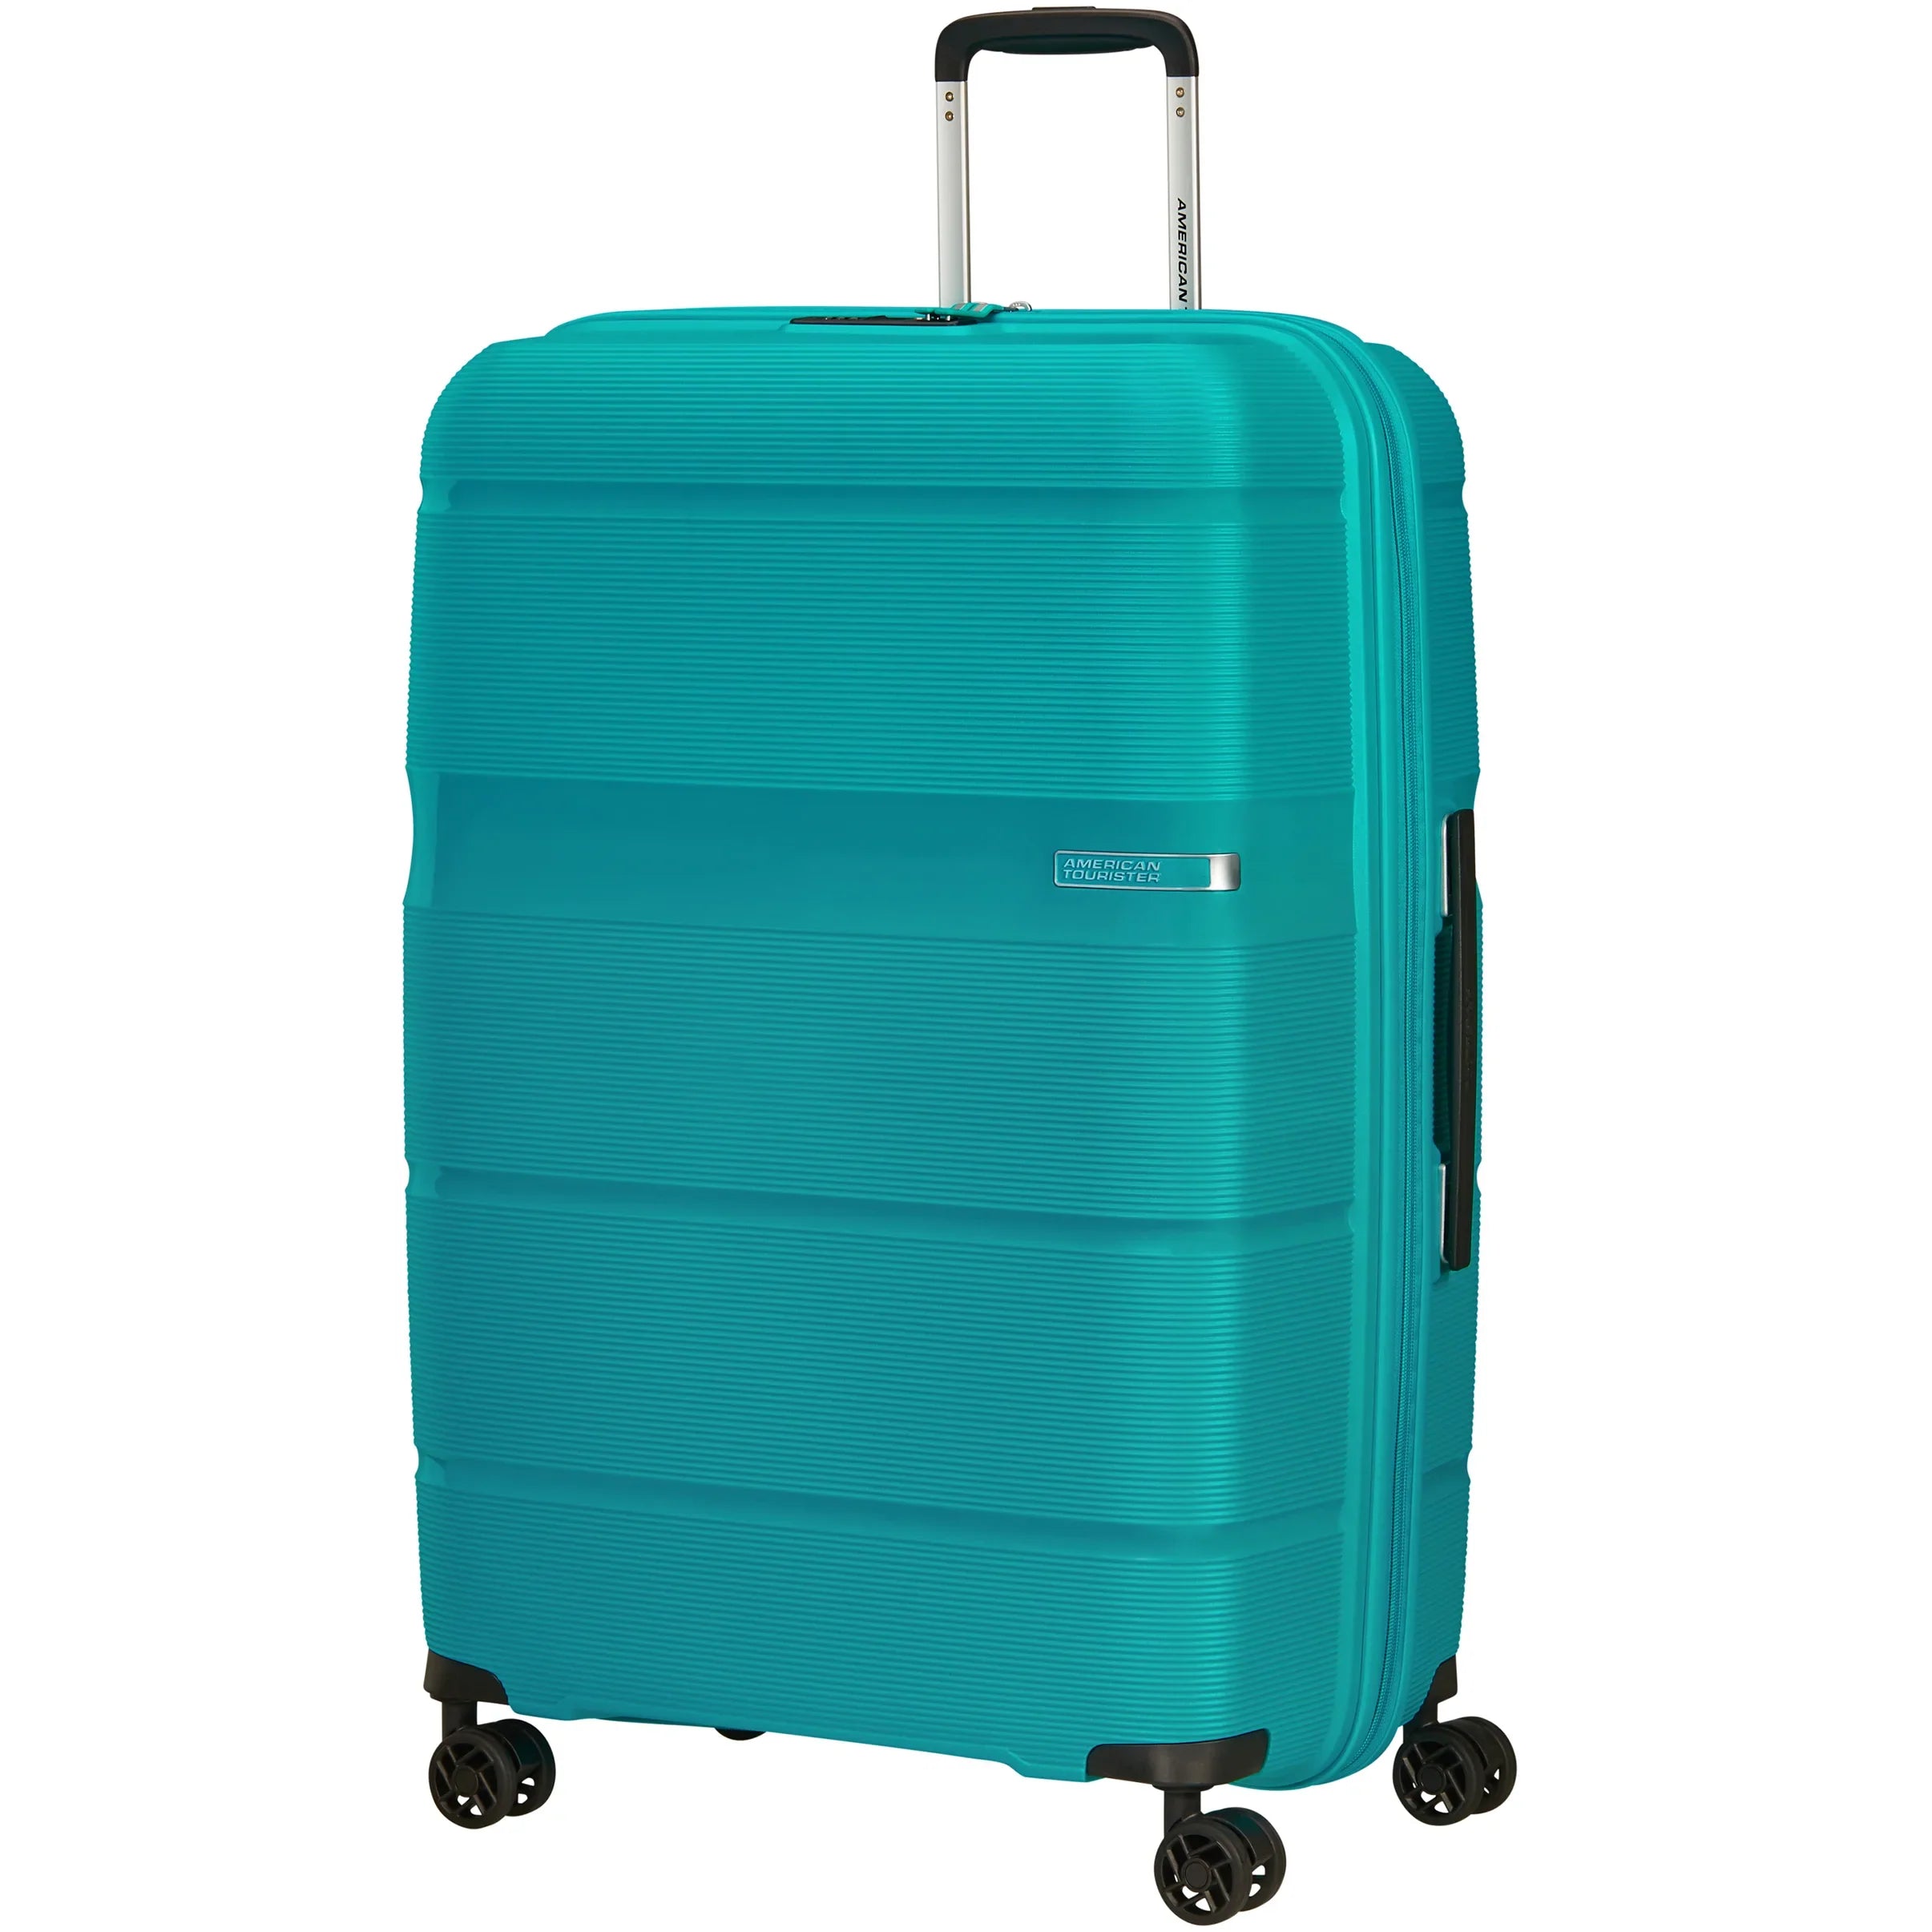 & Tourister 5 Trolleys Seite – American Koffer